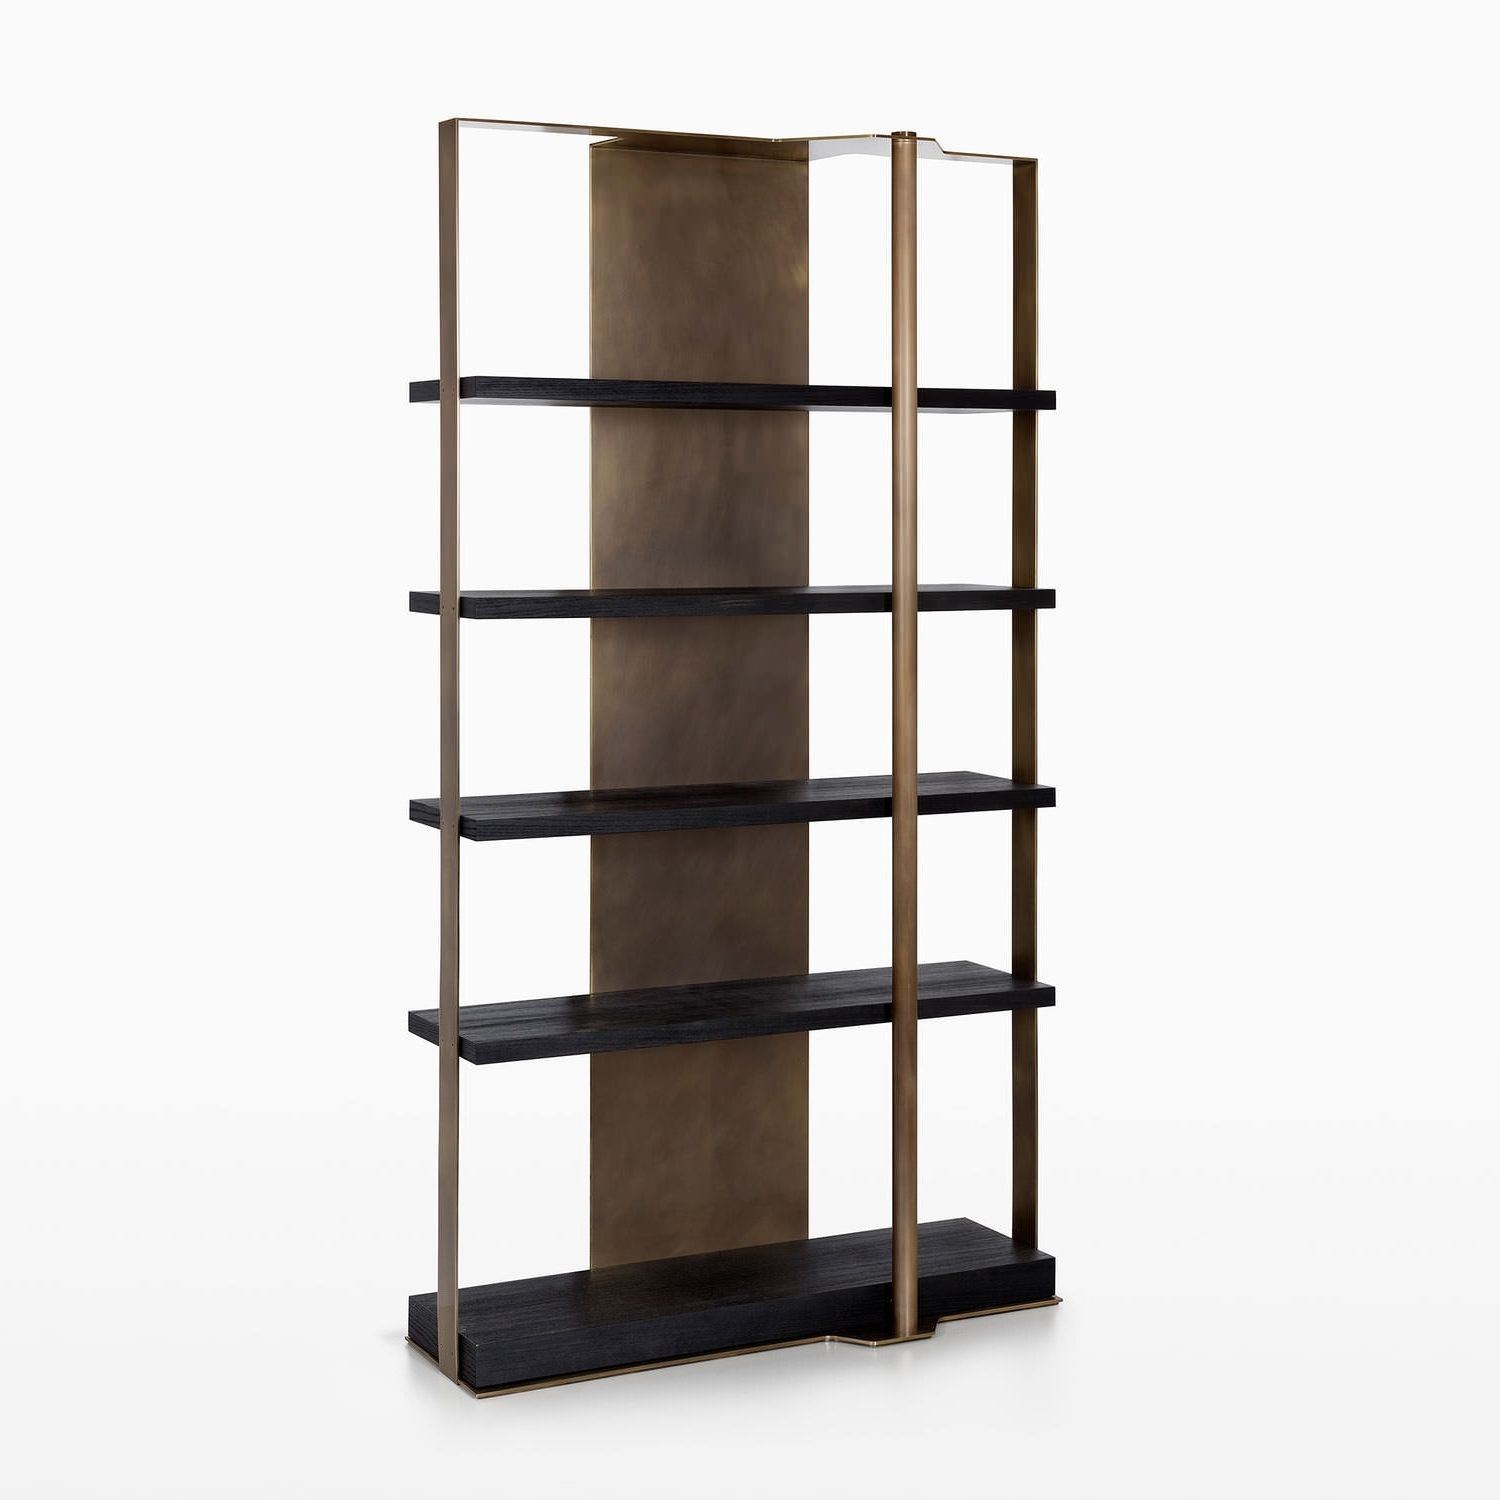 Brass Bookcases In Favorite Contemporary Bookcase / Oak / Brass – Holt – Caste (View 3 of 15)